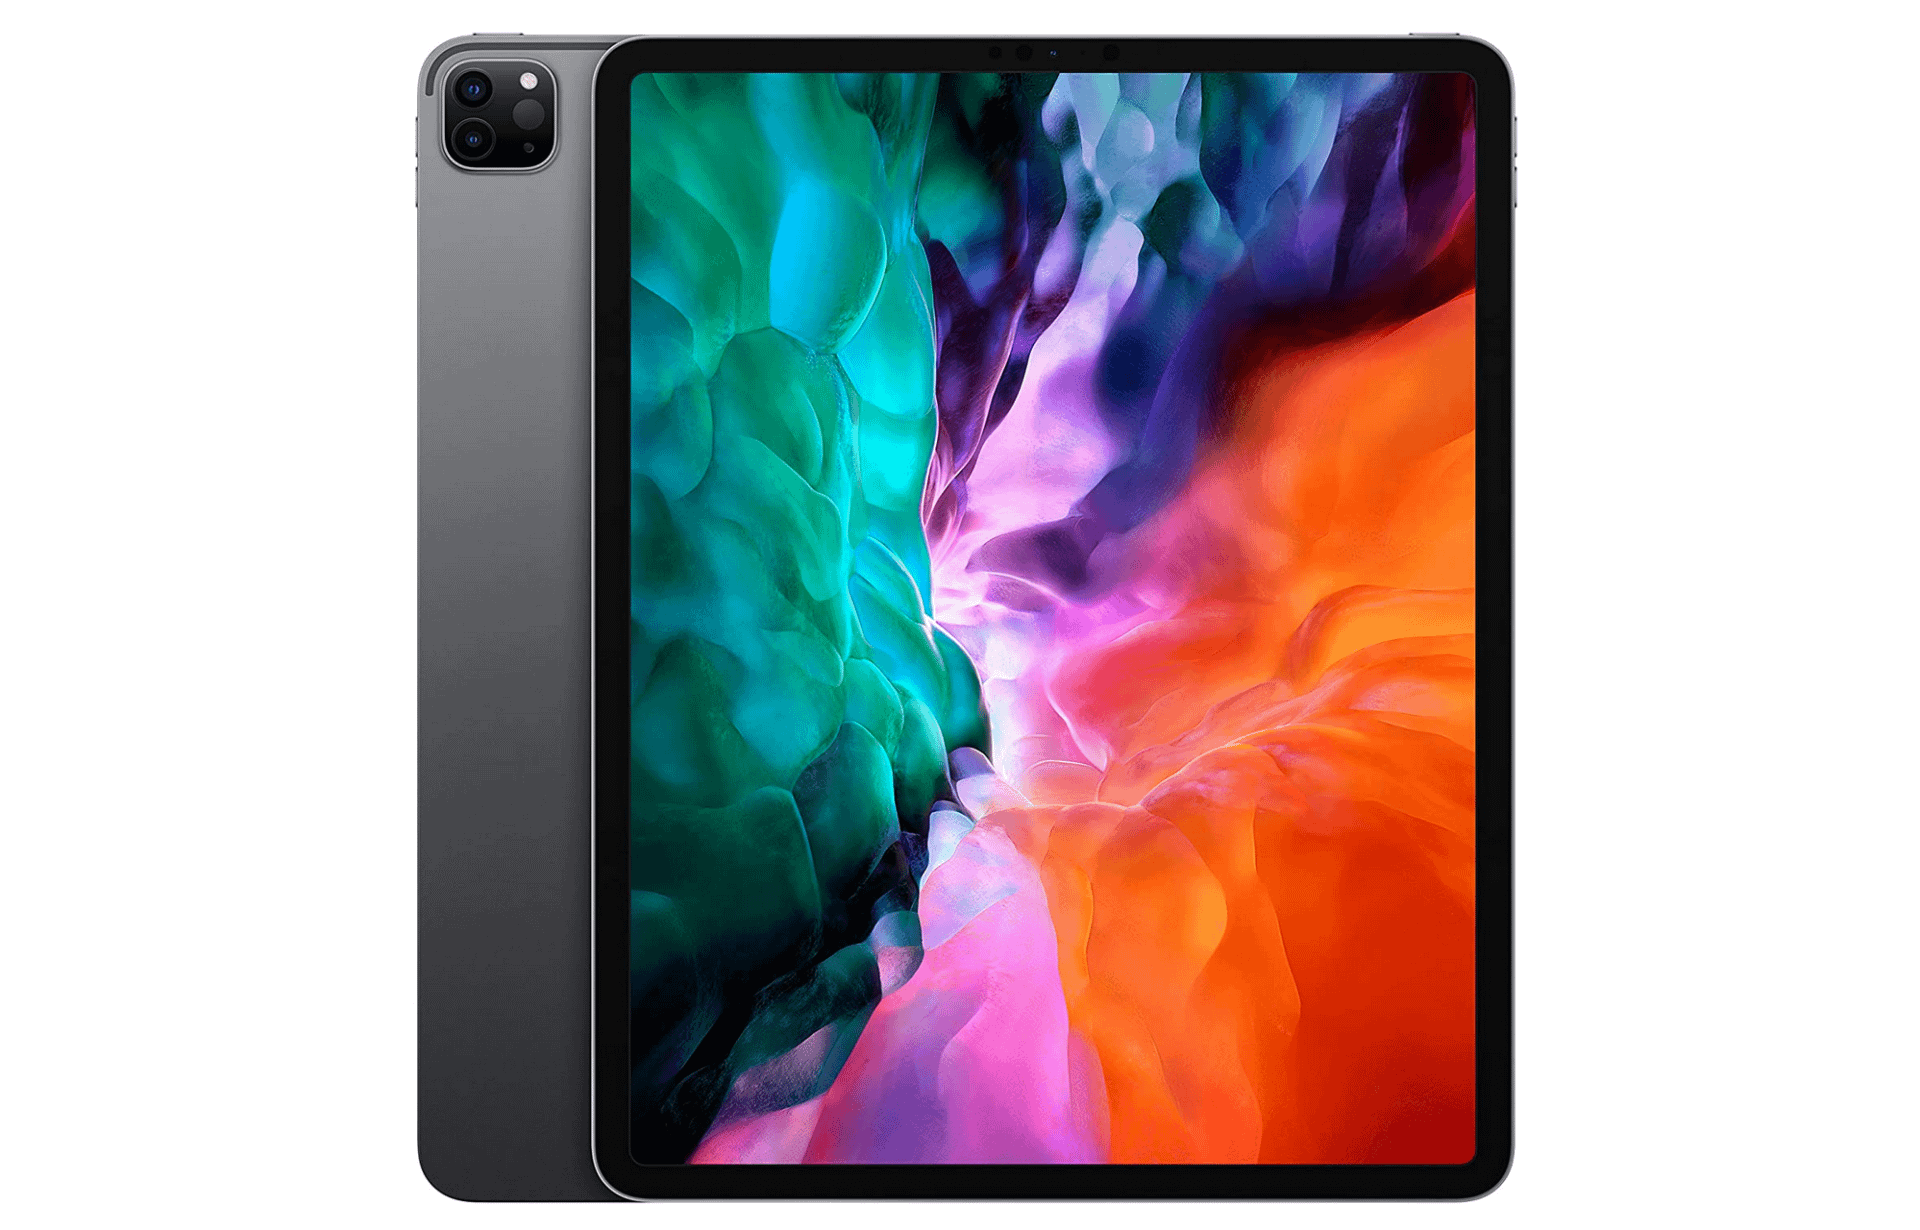 Apple iPad Pro 12.9 inch 4th Generation Technical Specifications